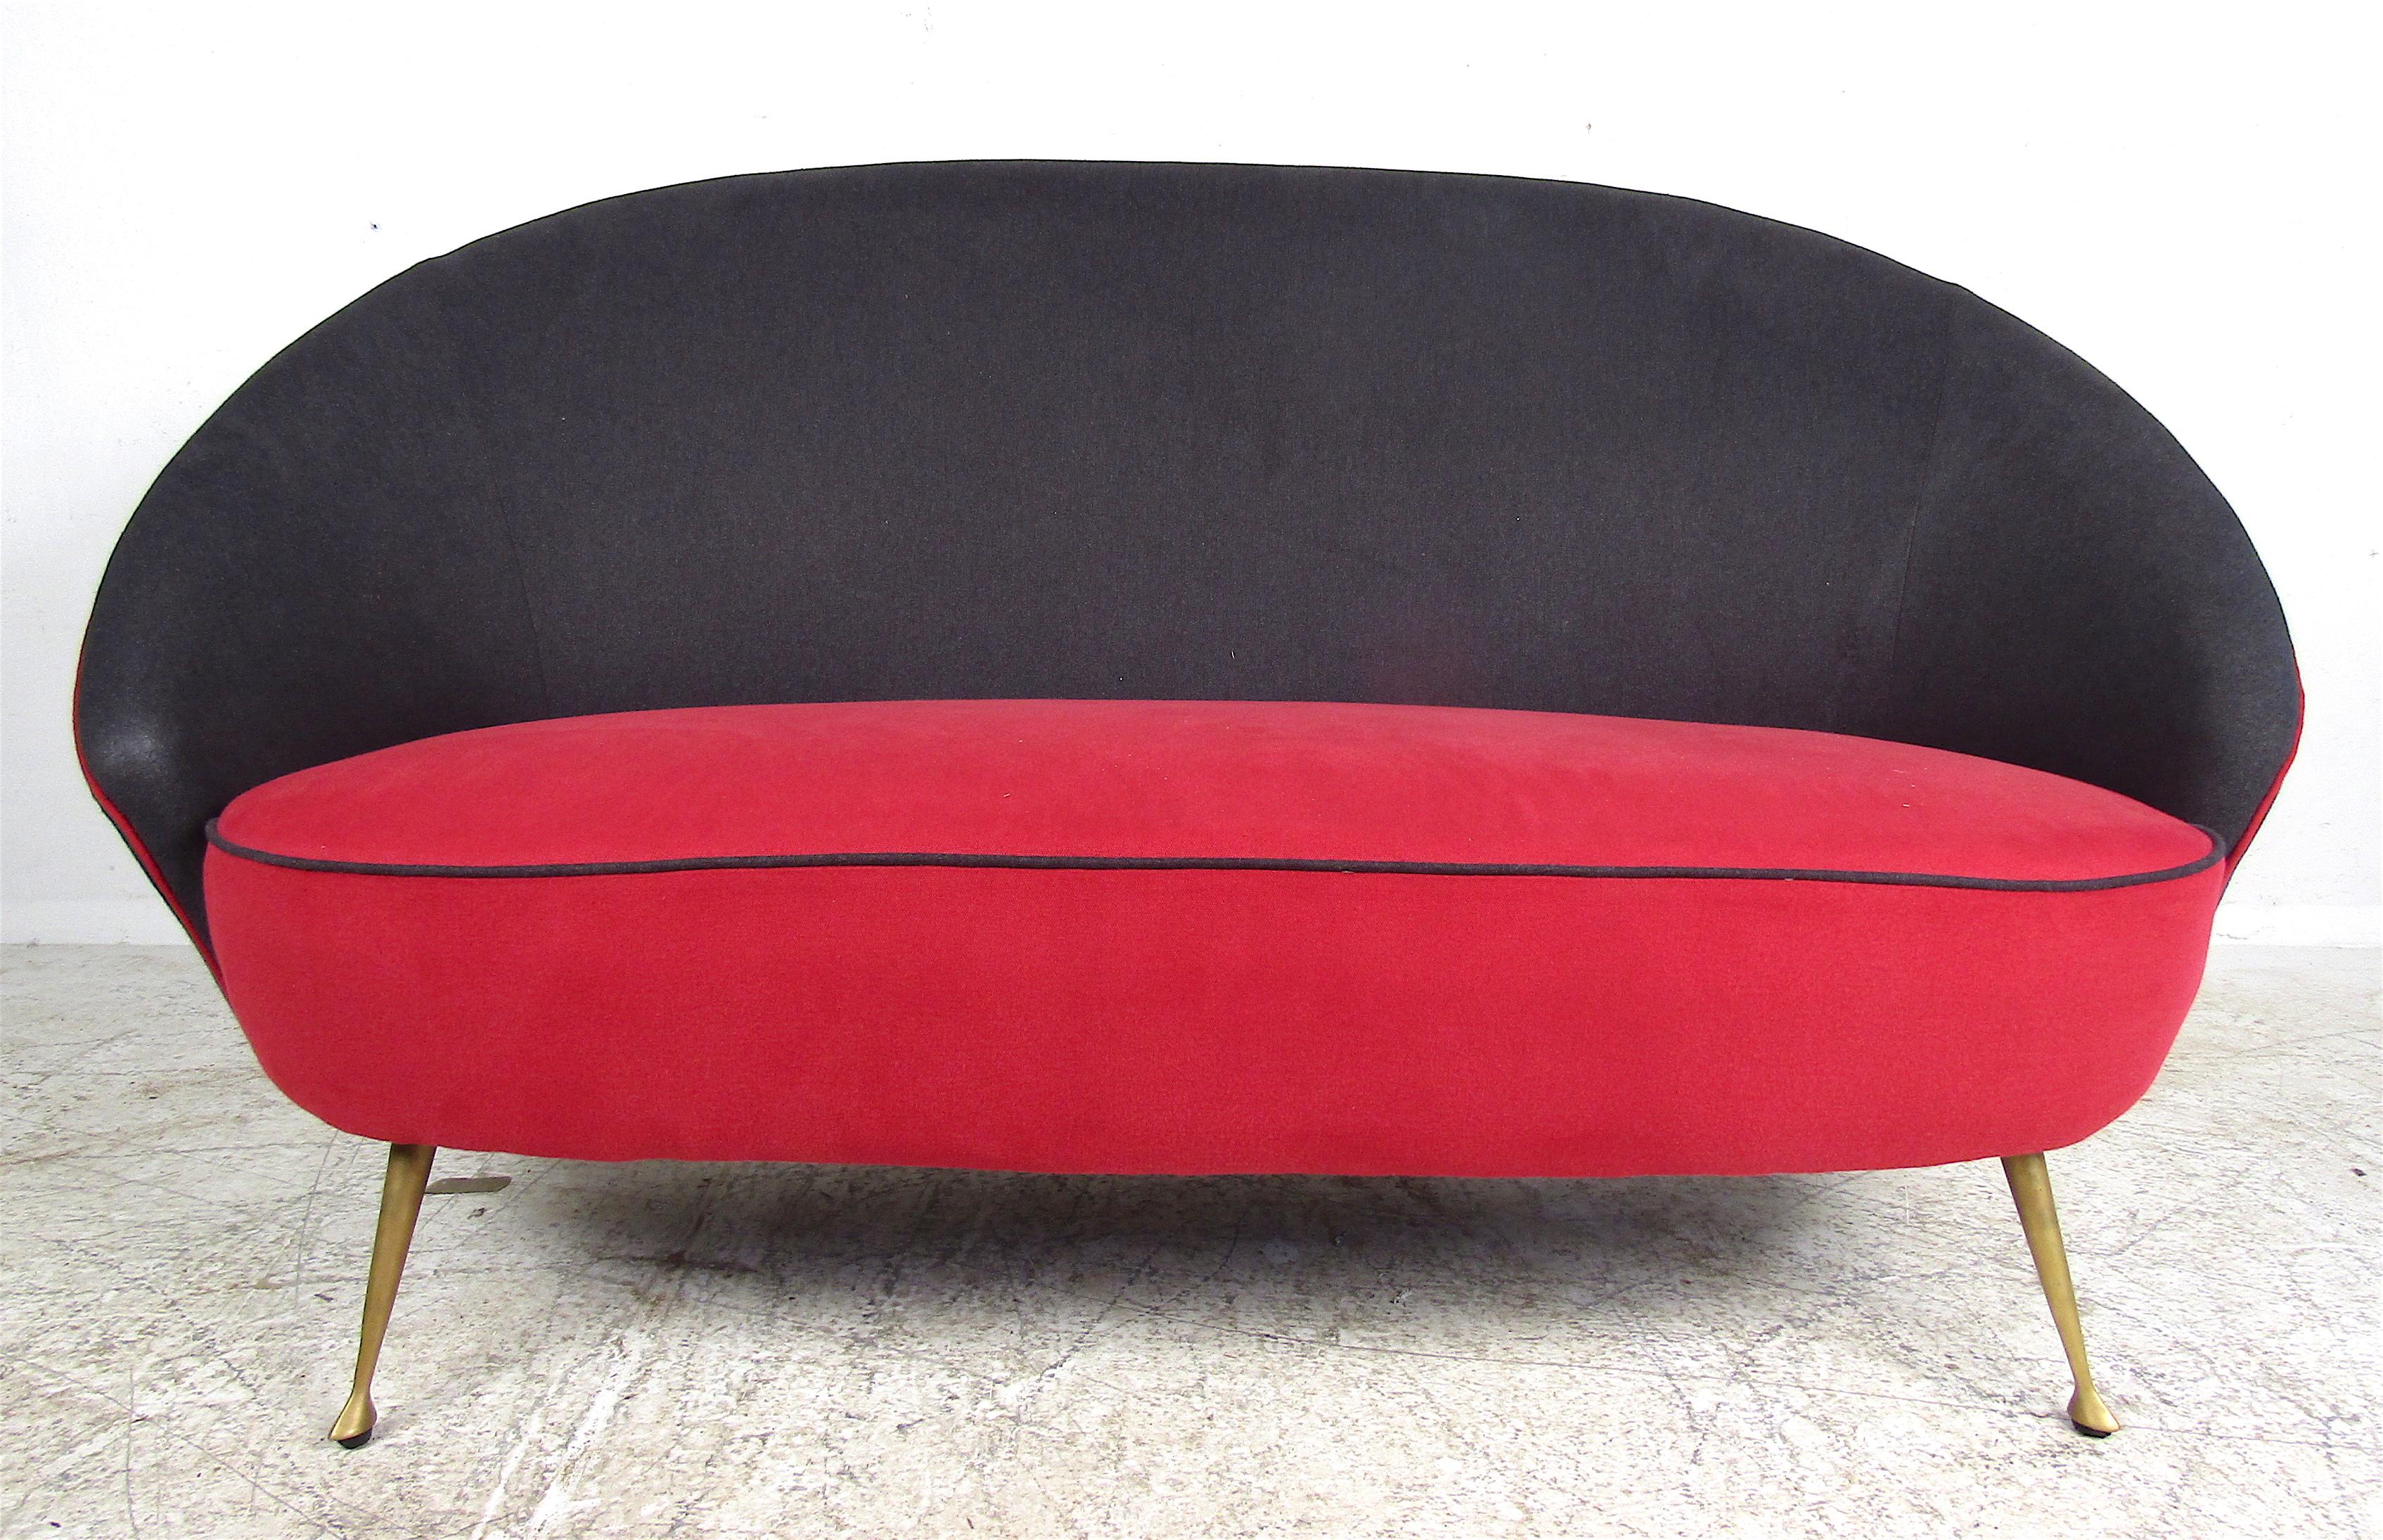 This beautiful vintage 1960s loveseat boasts splayed brass legs with sculpted feet. A sleek and sturdy Italian design with an ellipse-shaped backrest and overstuffed seating. A wild red and black velvet fabric that is sure to make an impression in